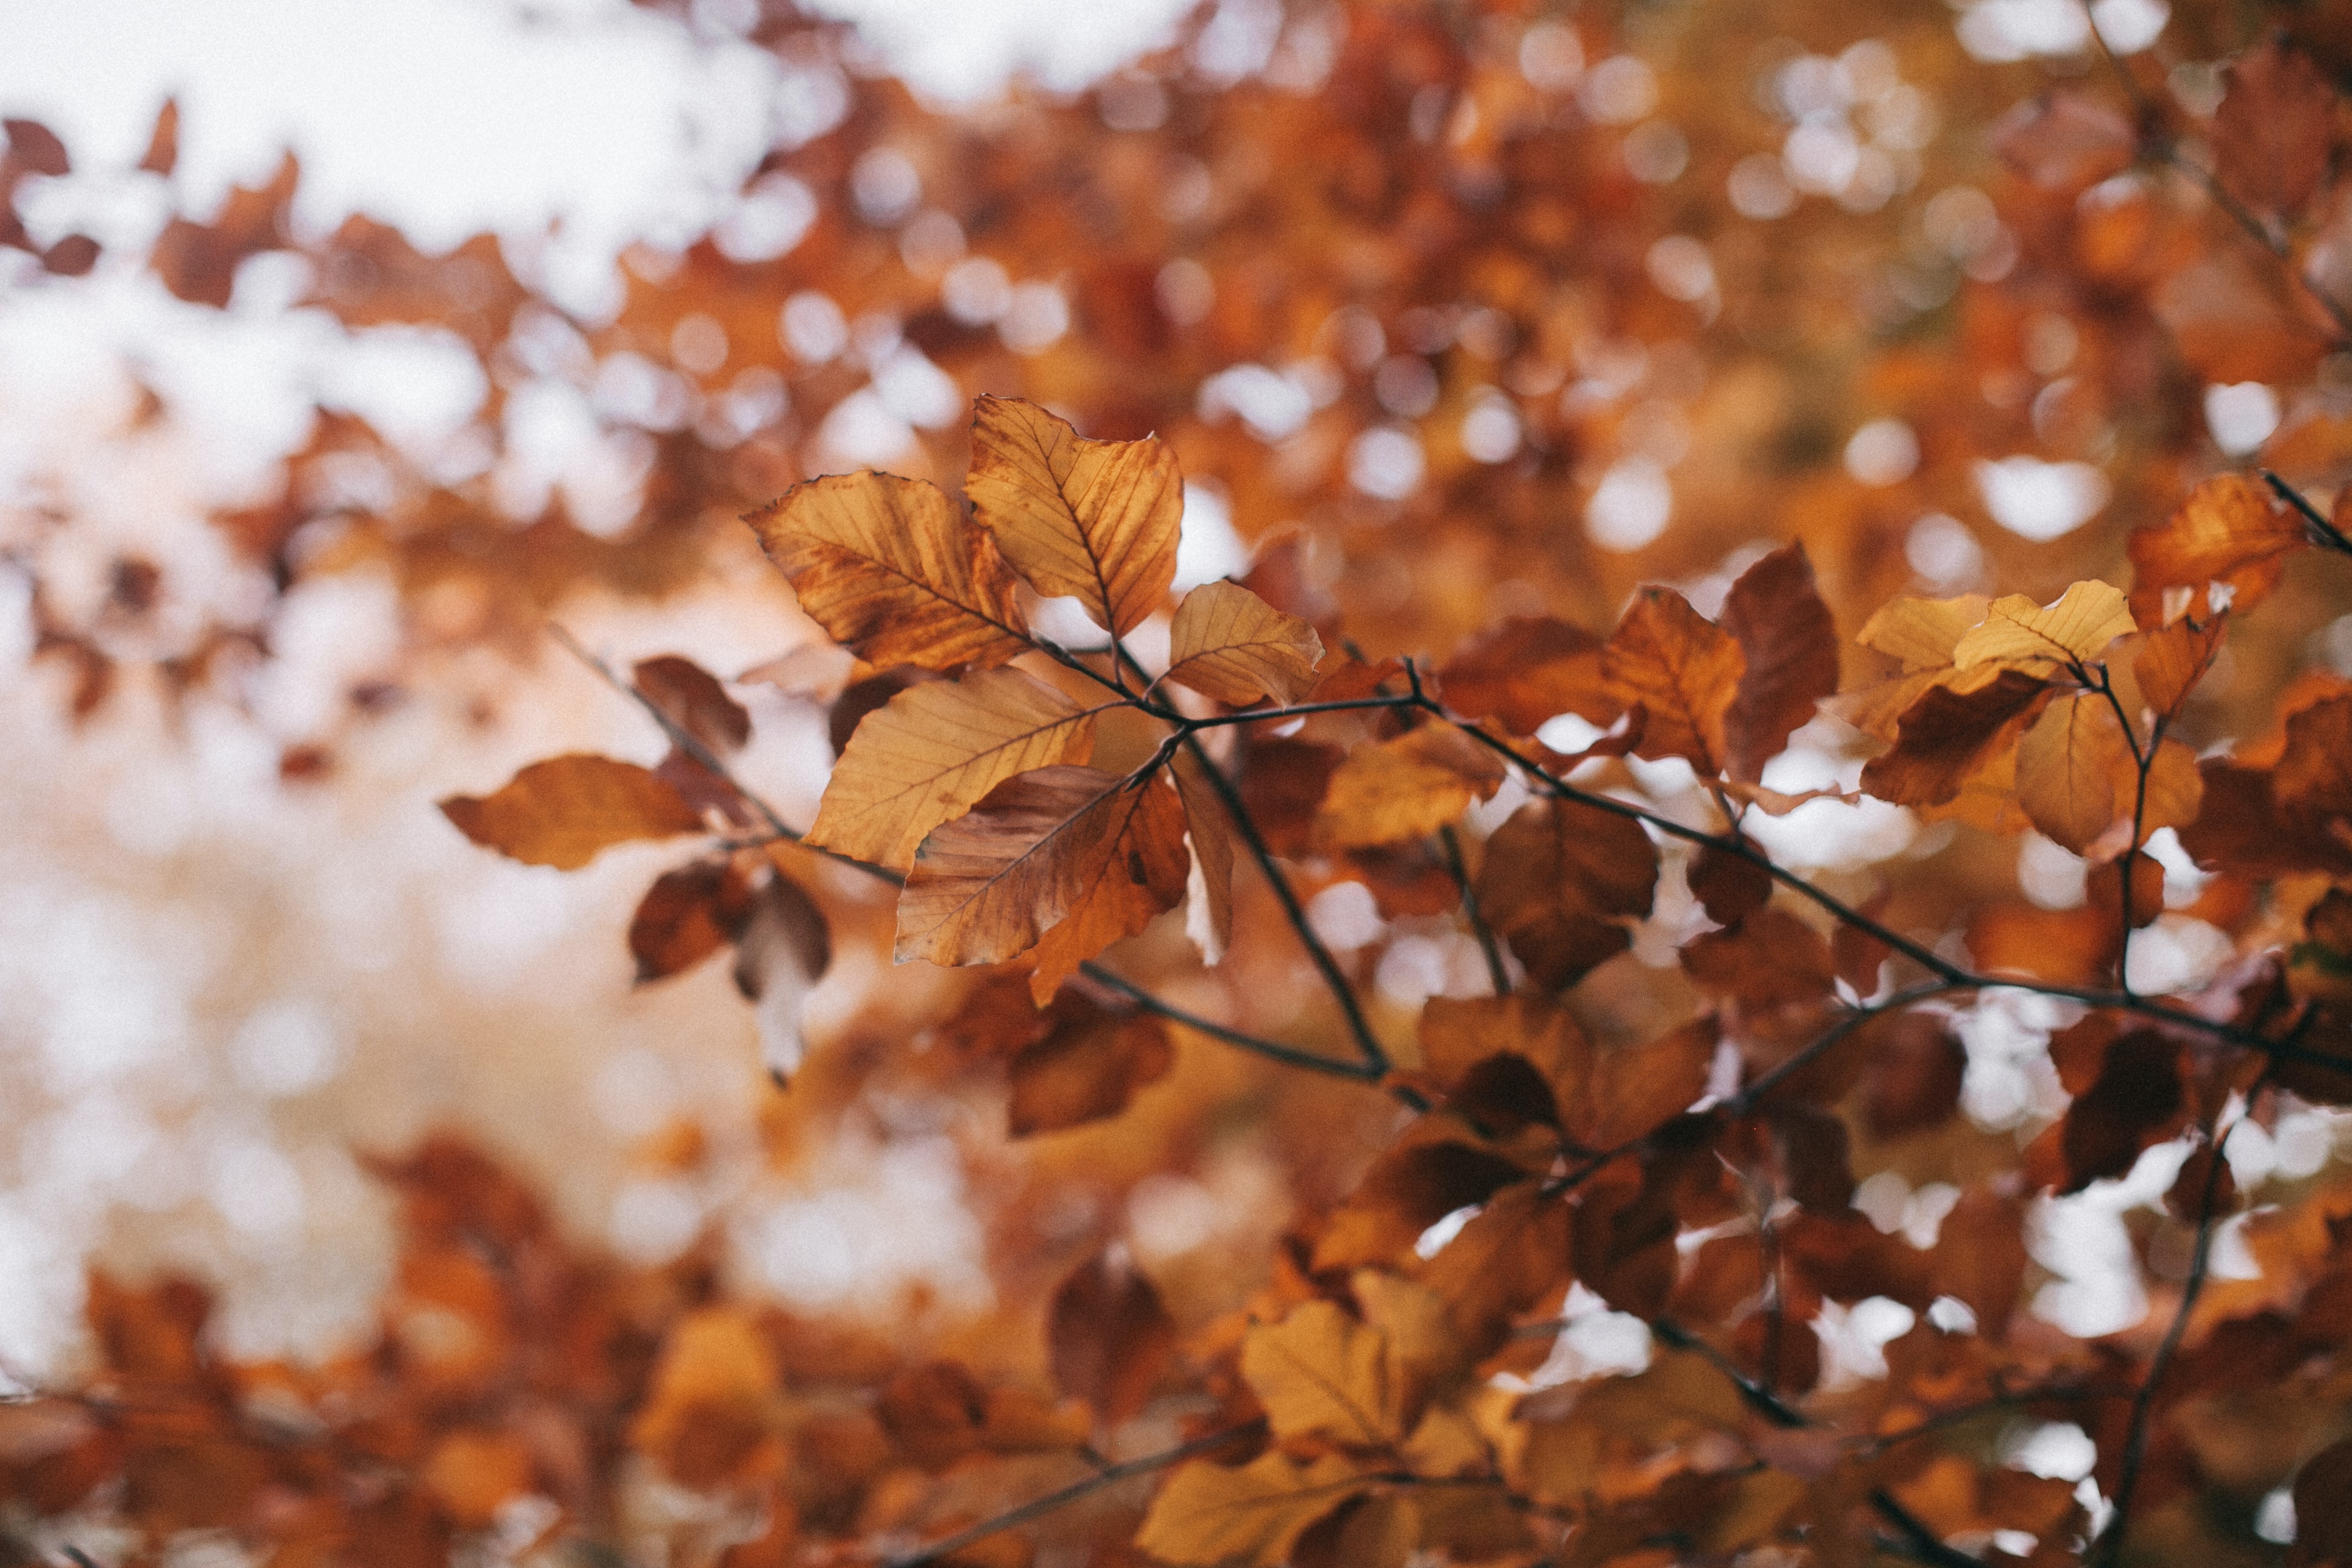 A tree with leaves and branches in the background - Vintage fall